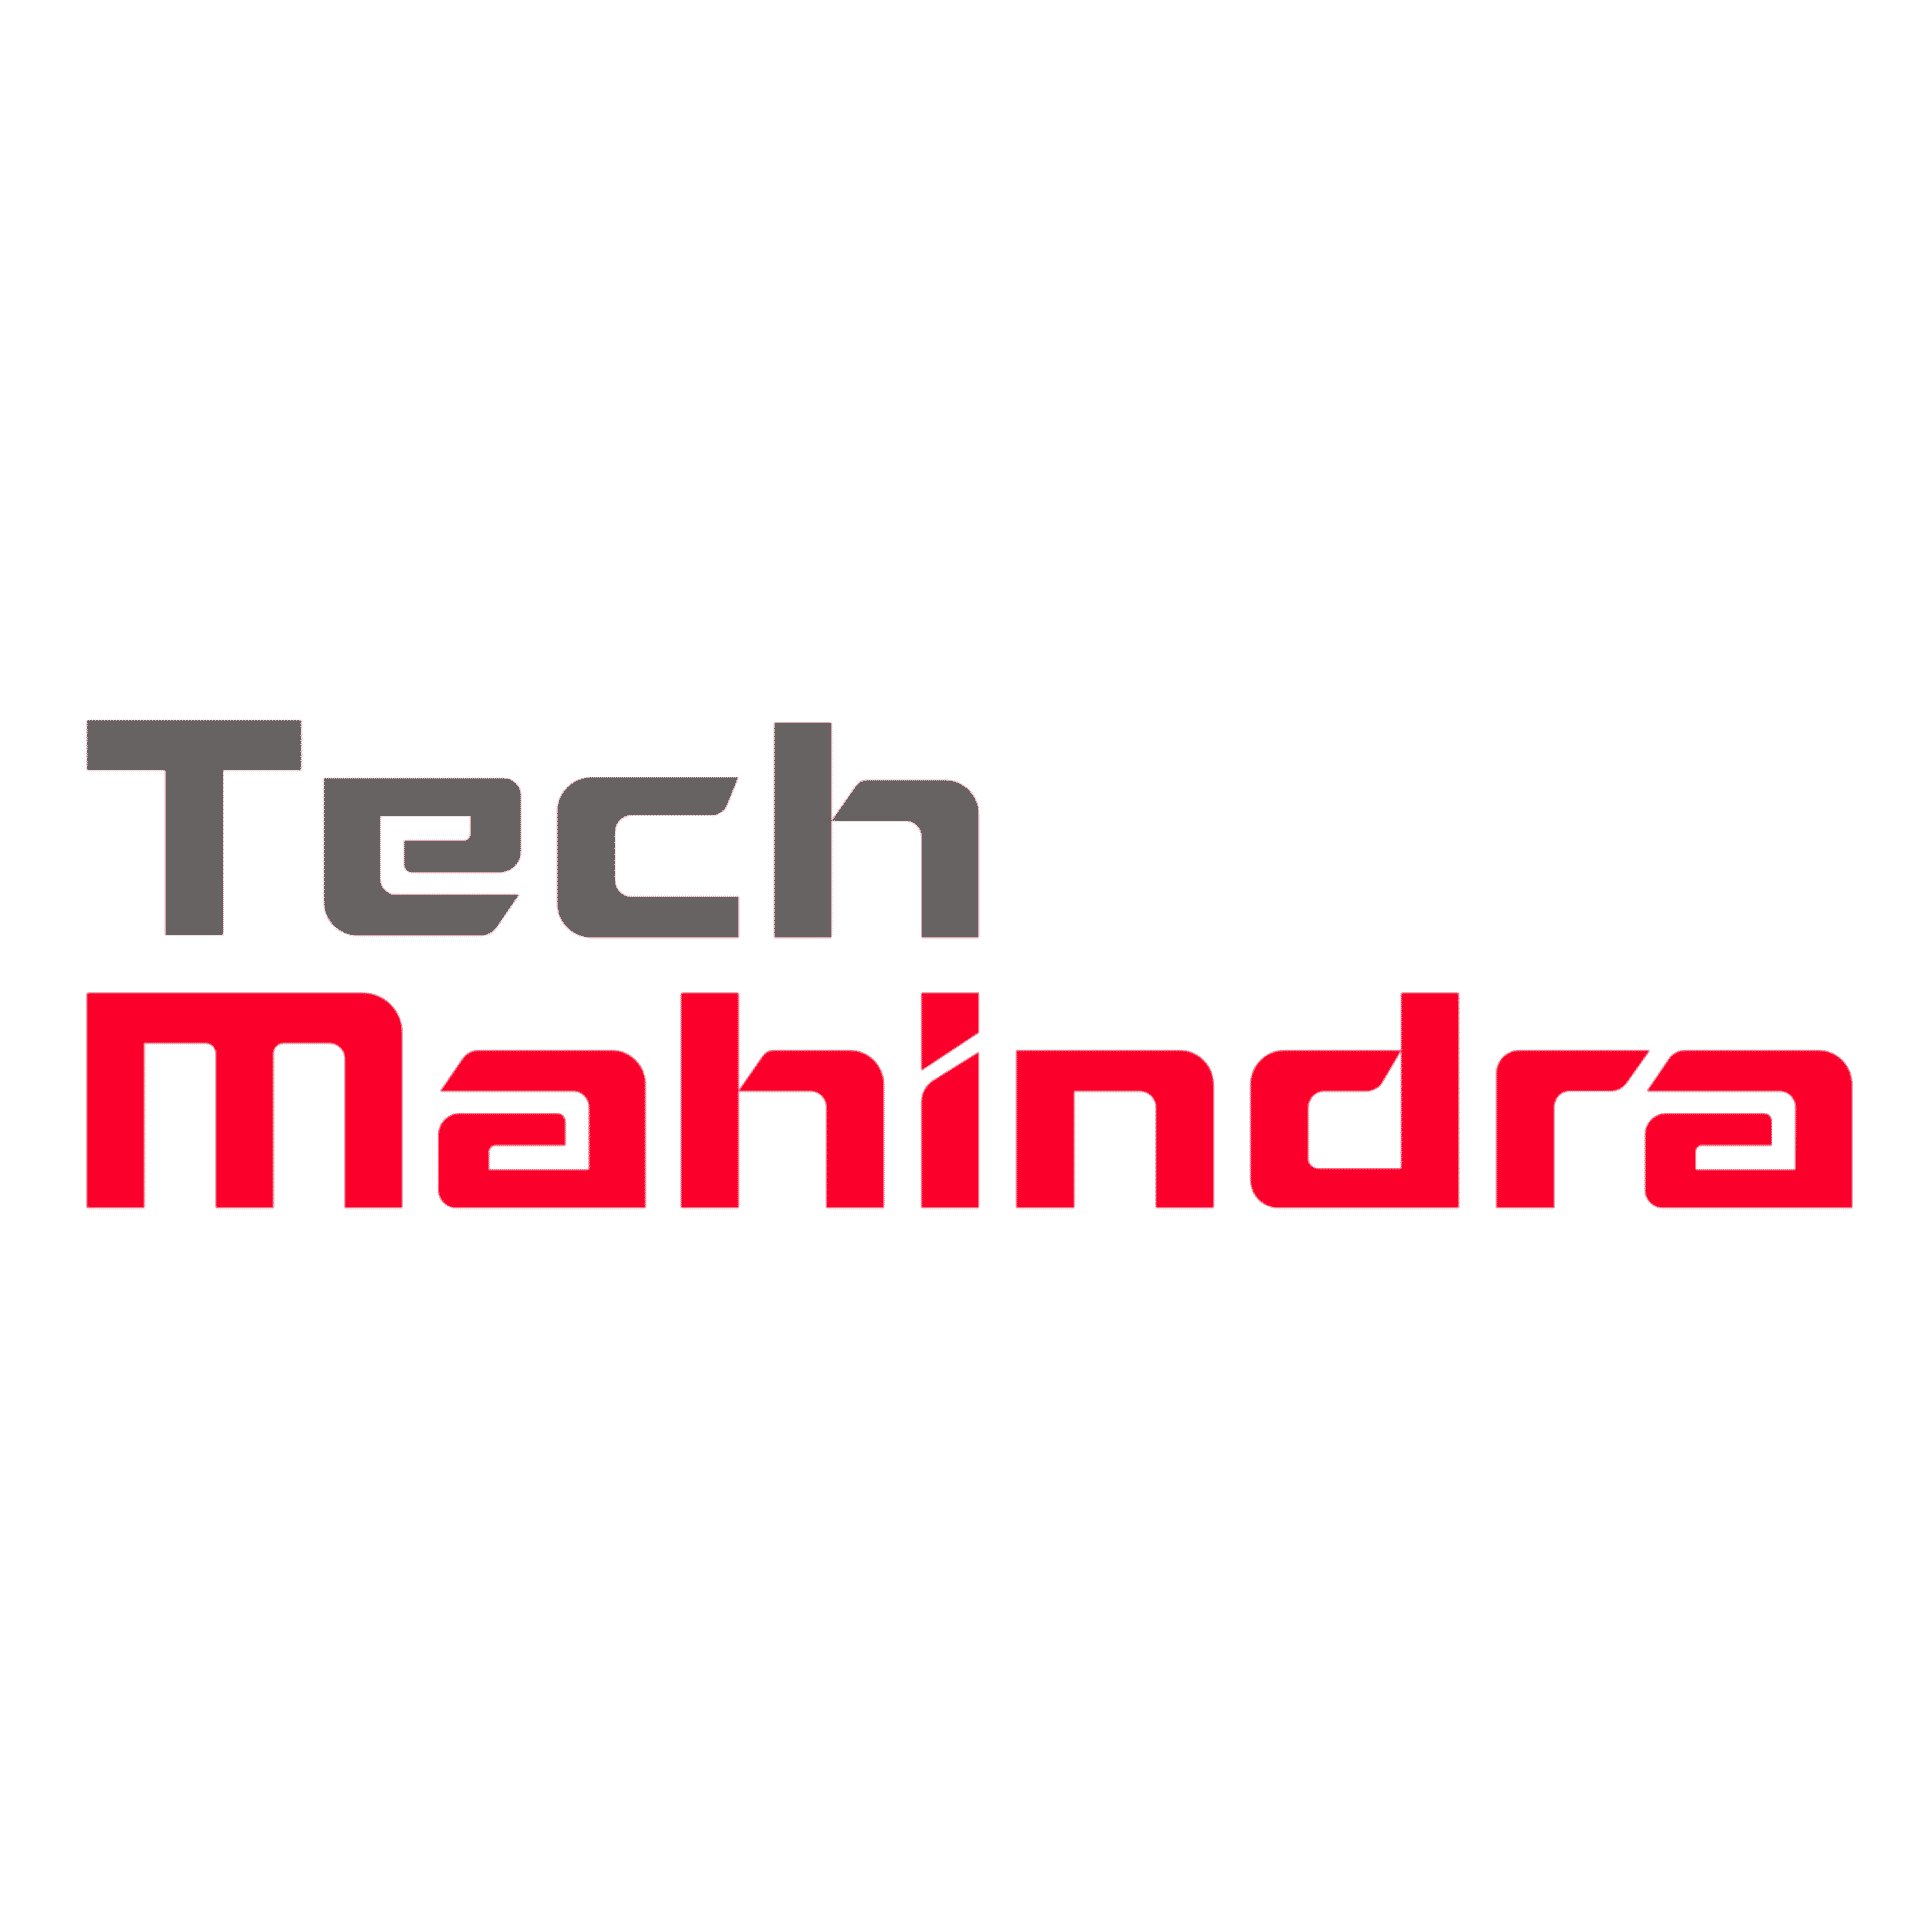 List of All the Subsidiaries of Mahindra Group